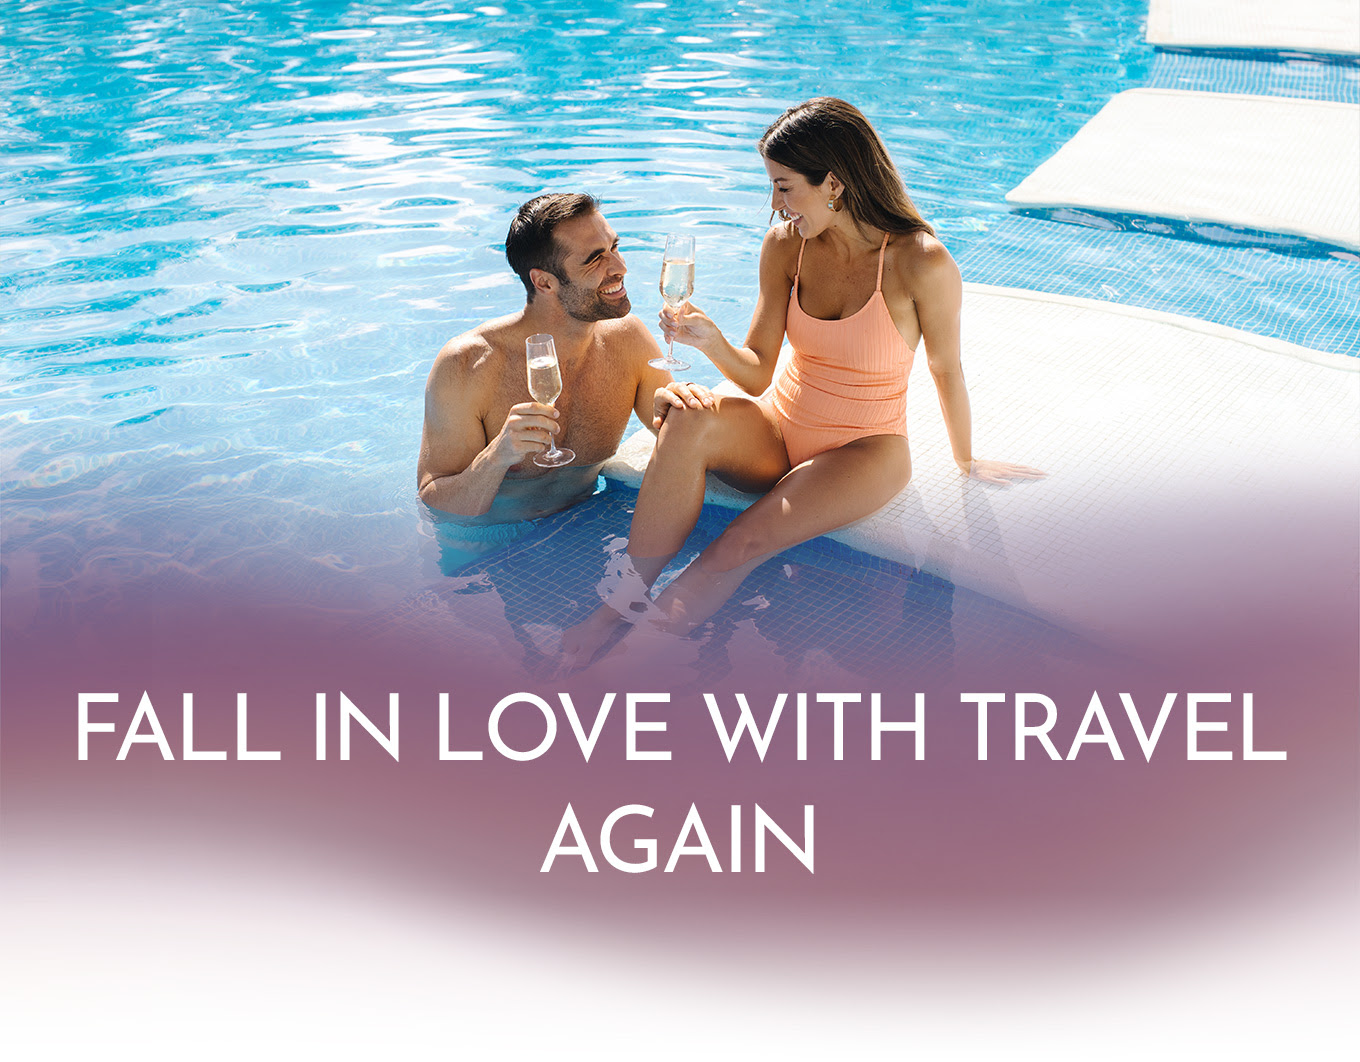 Fall in love with travel again